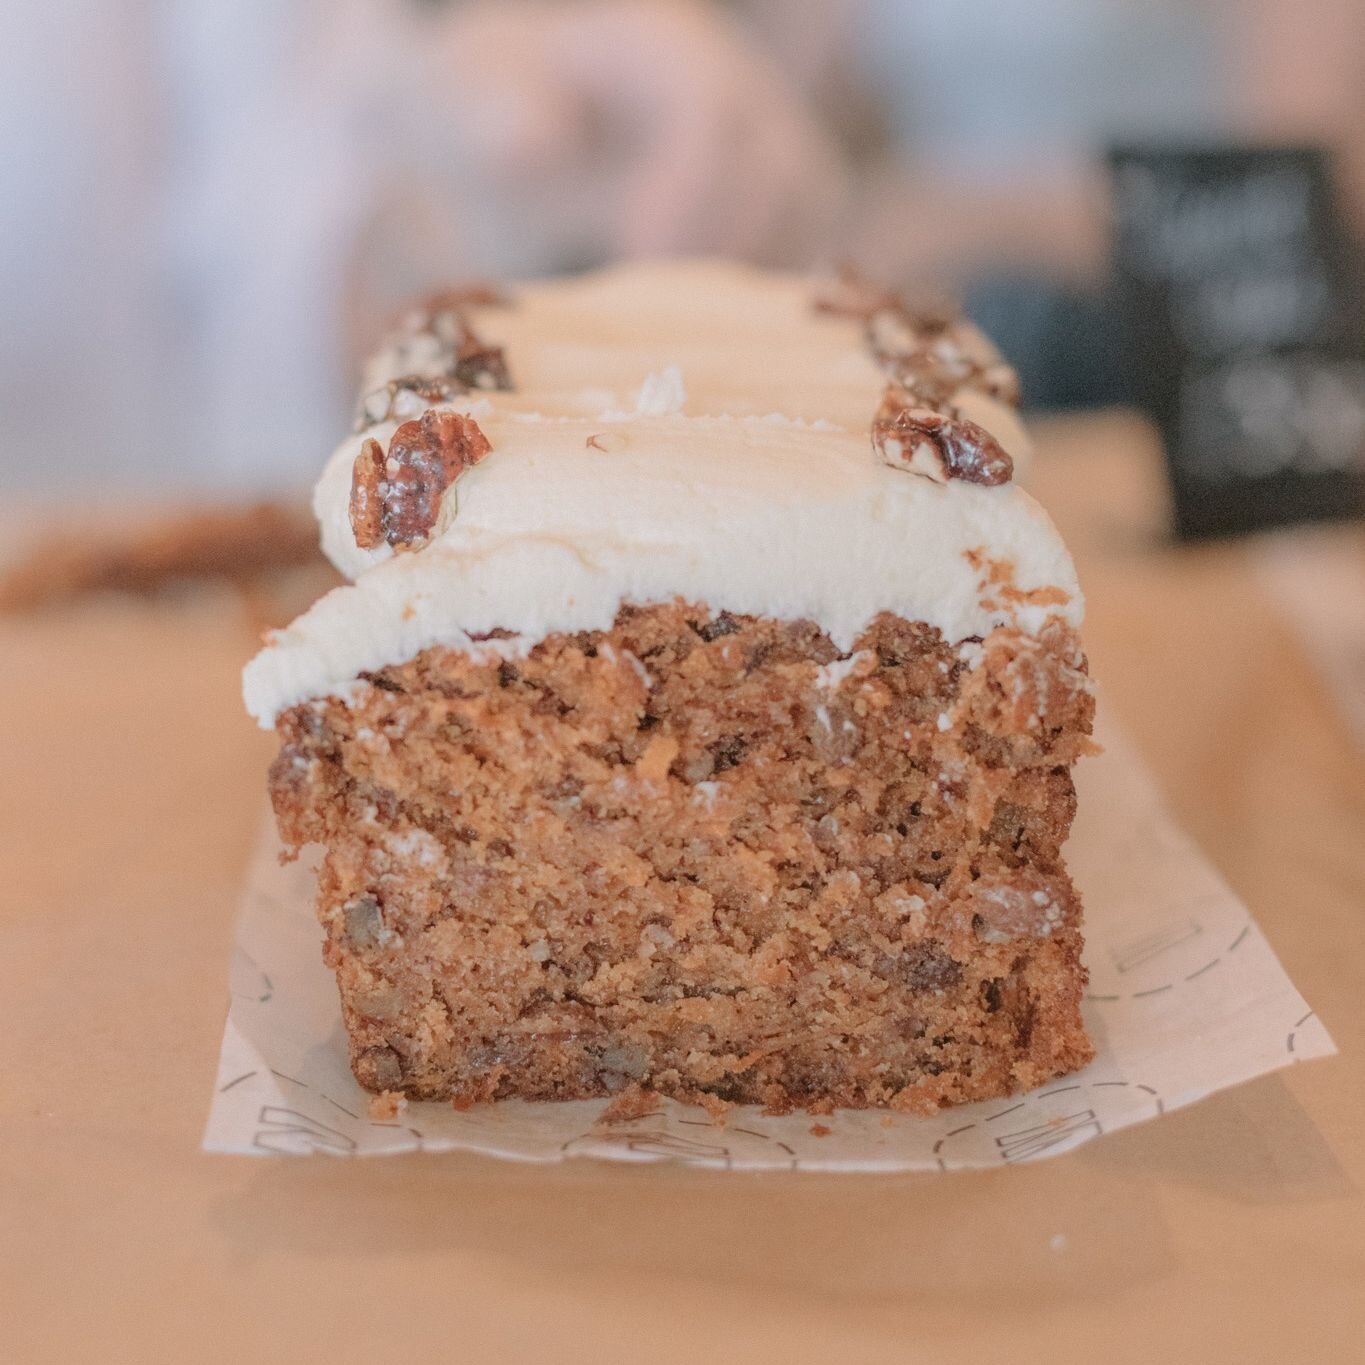 Classic bakes 〰️ you'll find a selection of all-time faves on the top of our sweet counter. Baked here at the Workhouse and available to order for a celebration too! #ForTheLoveOfCake #ClassicBakes #CarrotCake #SweetTreats